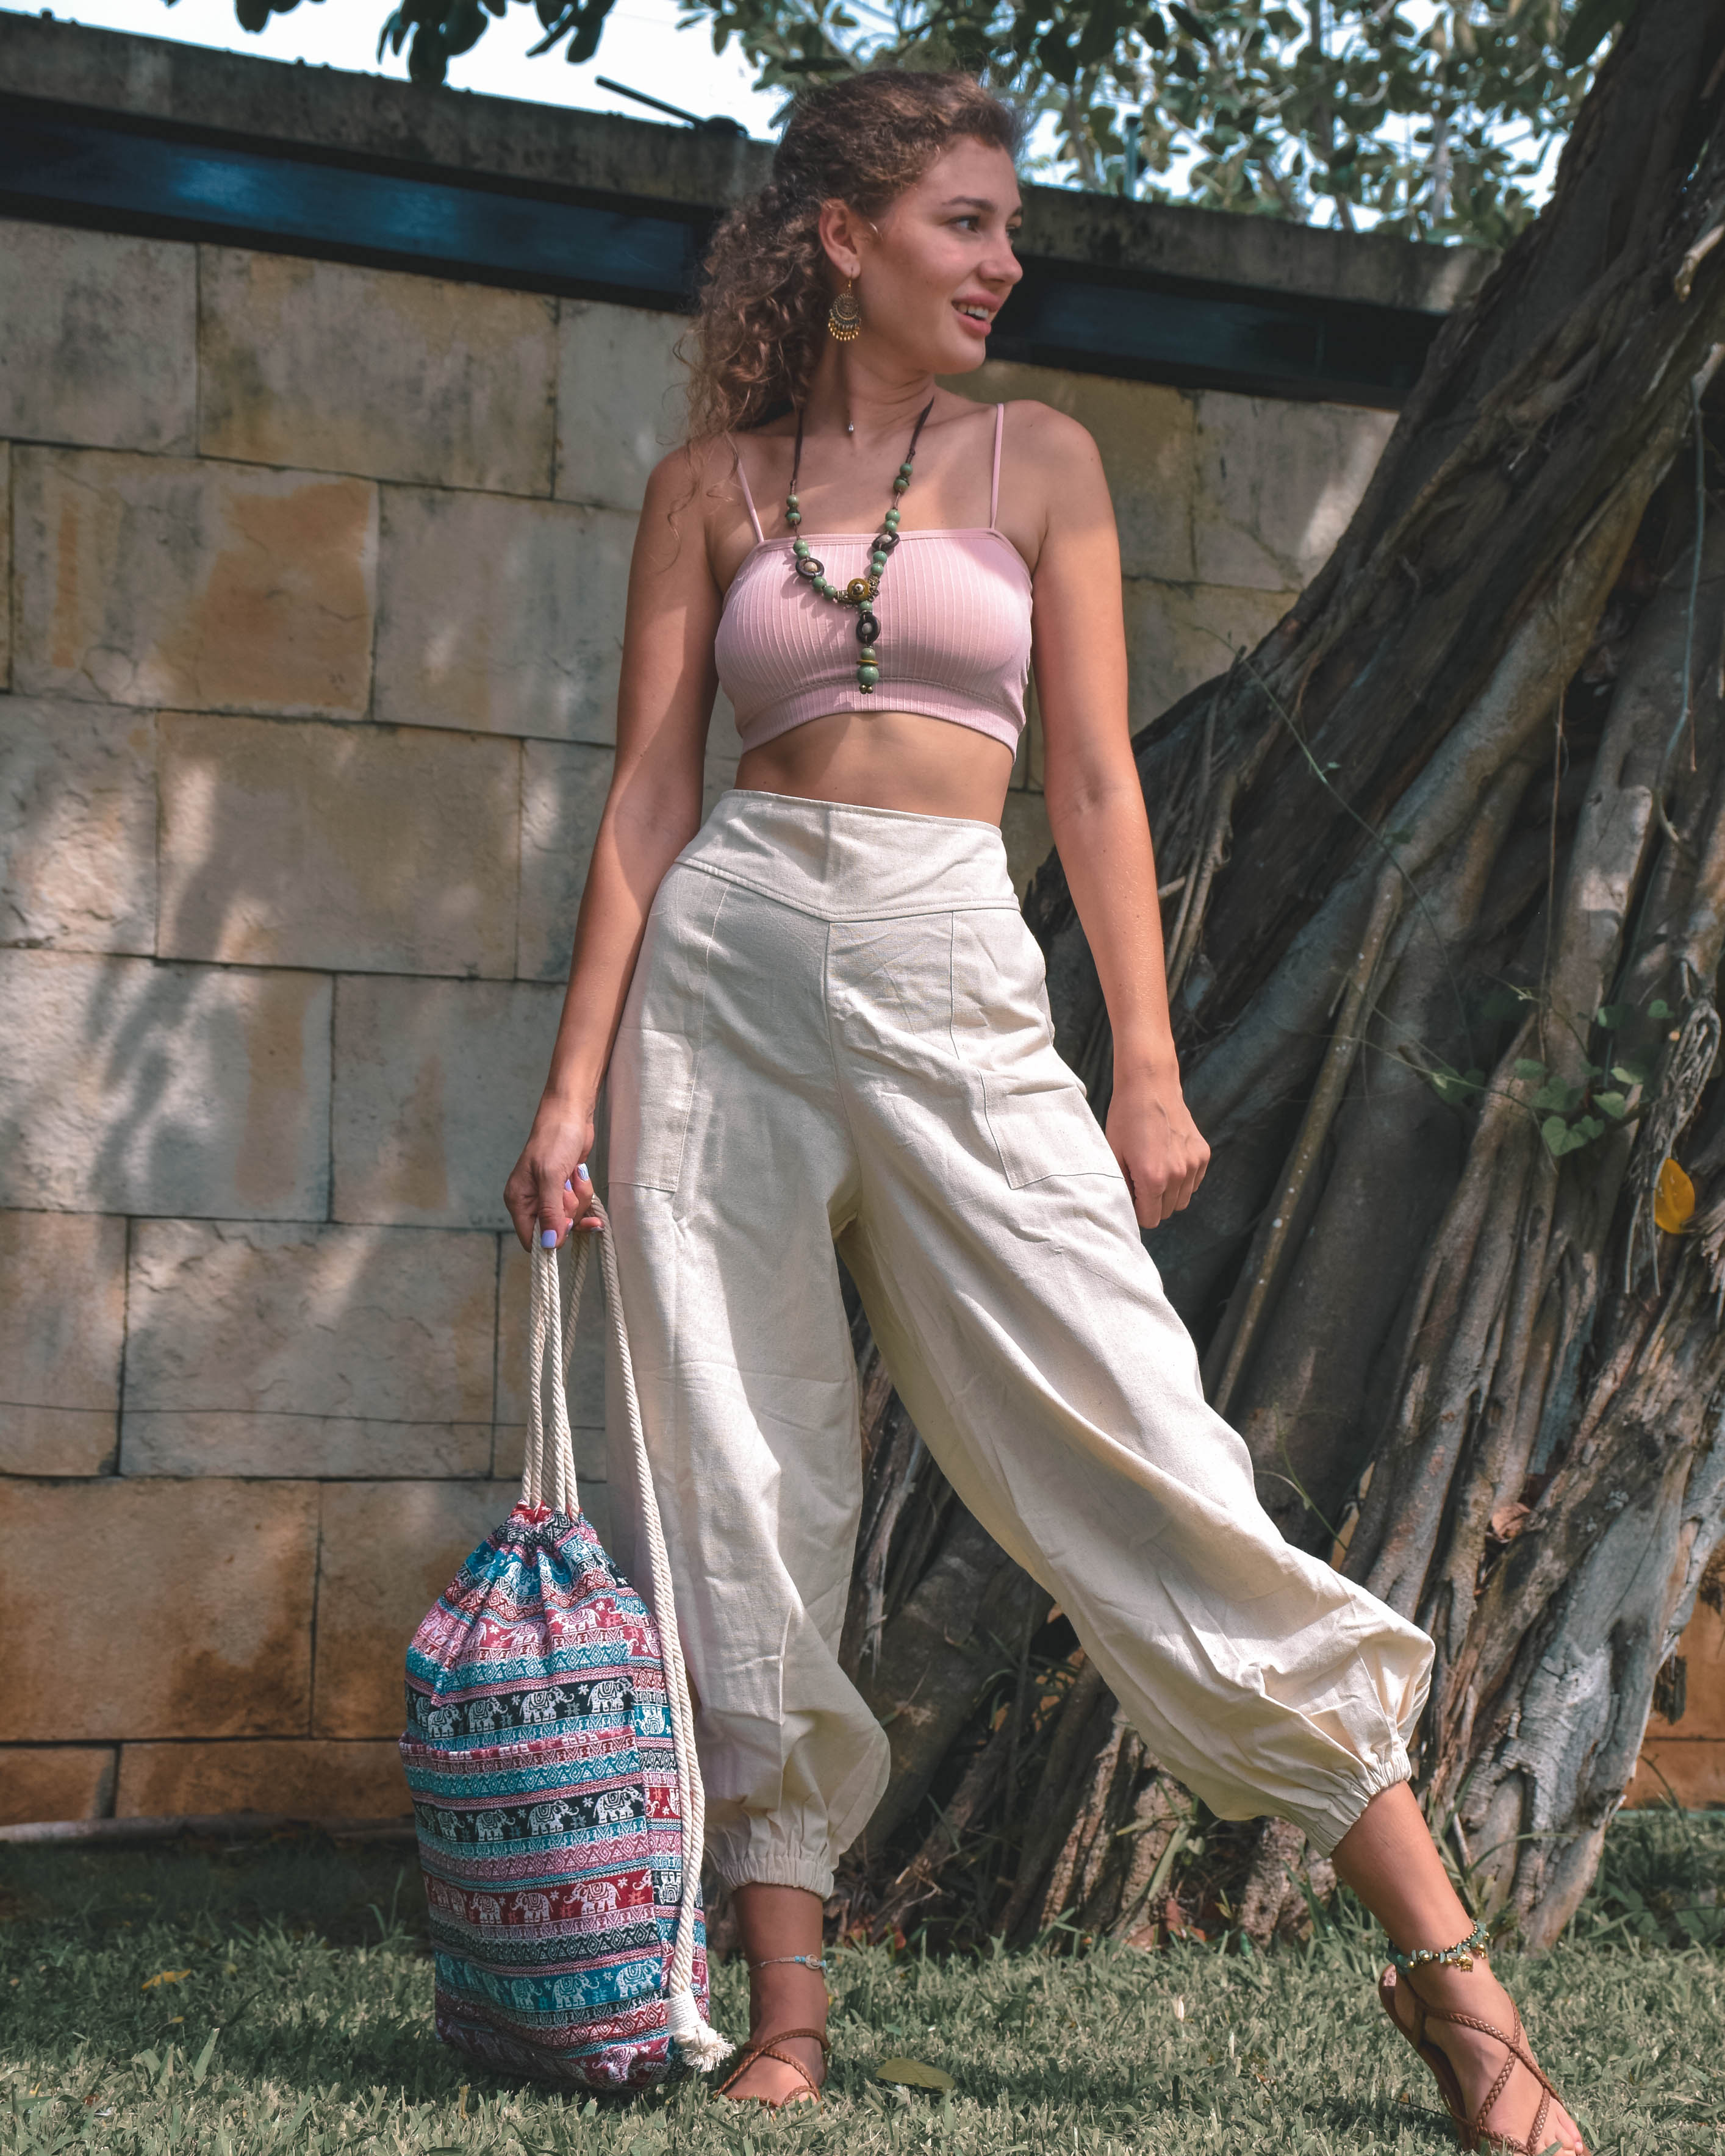 CEIBA DRAWSTRING BAG Elepanta Travel Bags - Buy Today Elephant Pants Jewelry And Bohemian Clothes Handmade In Thailand Help To Save The Elephants FairTrade And Vegan